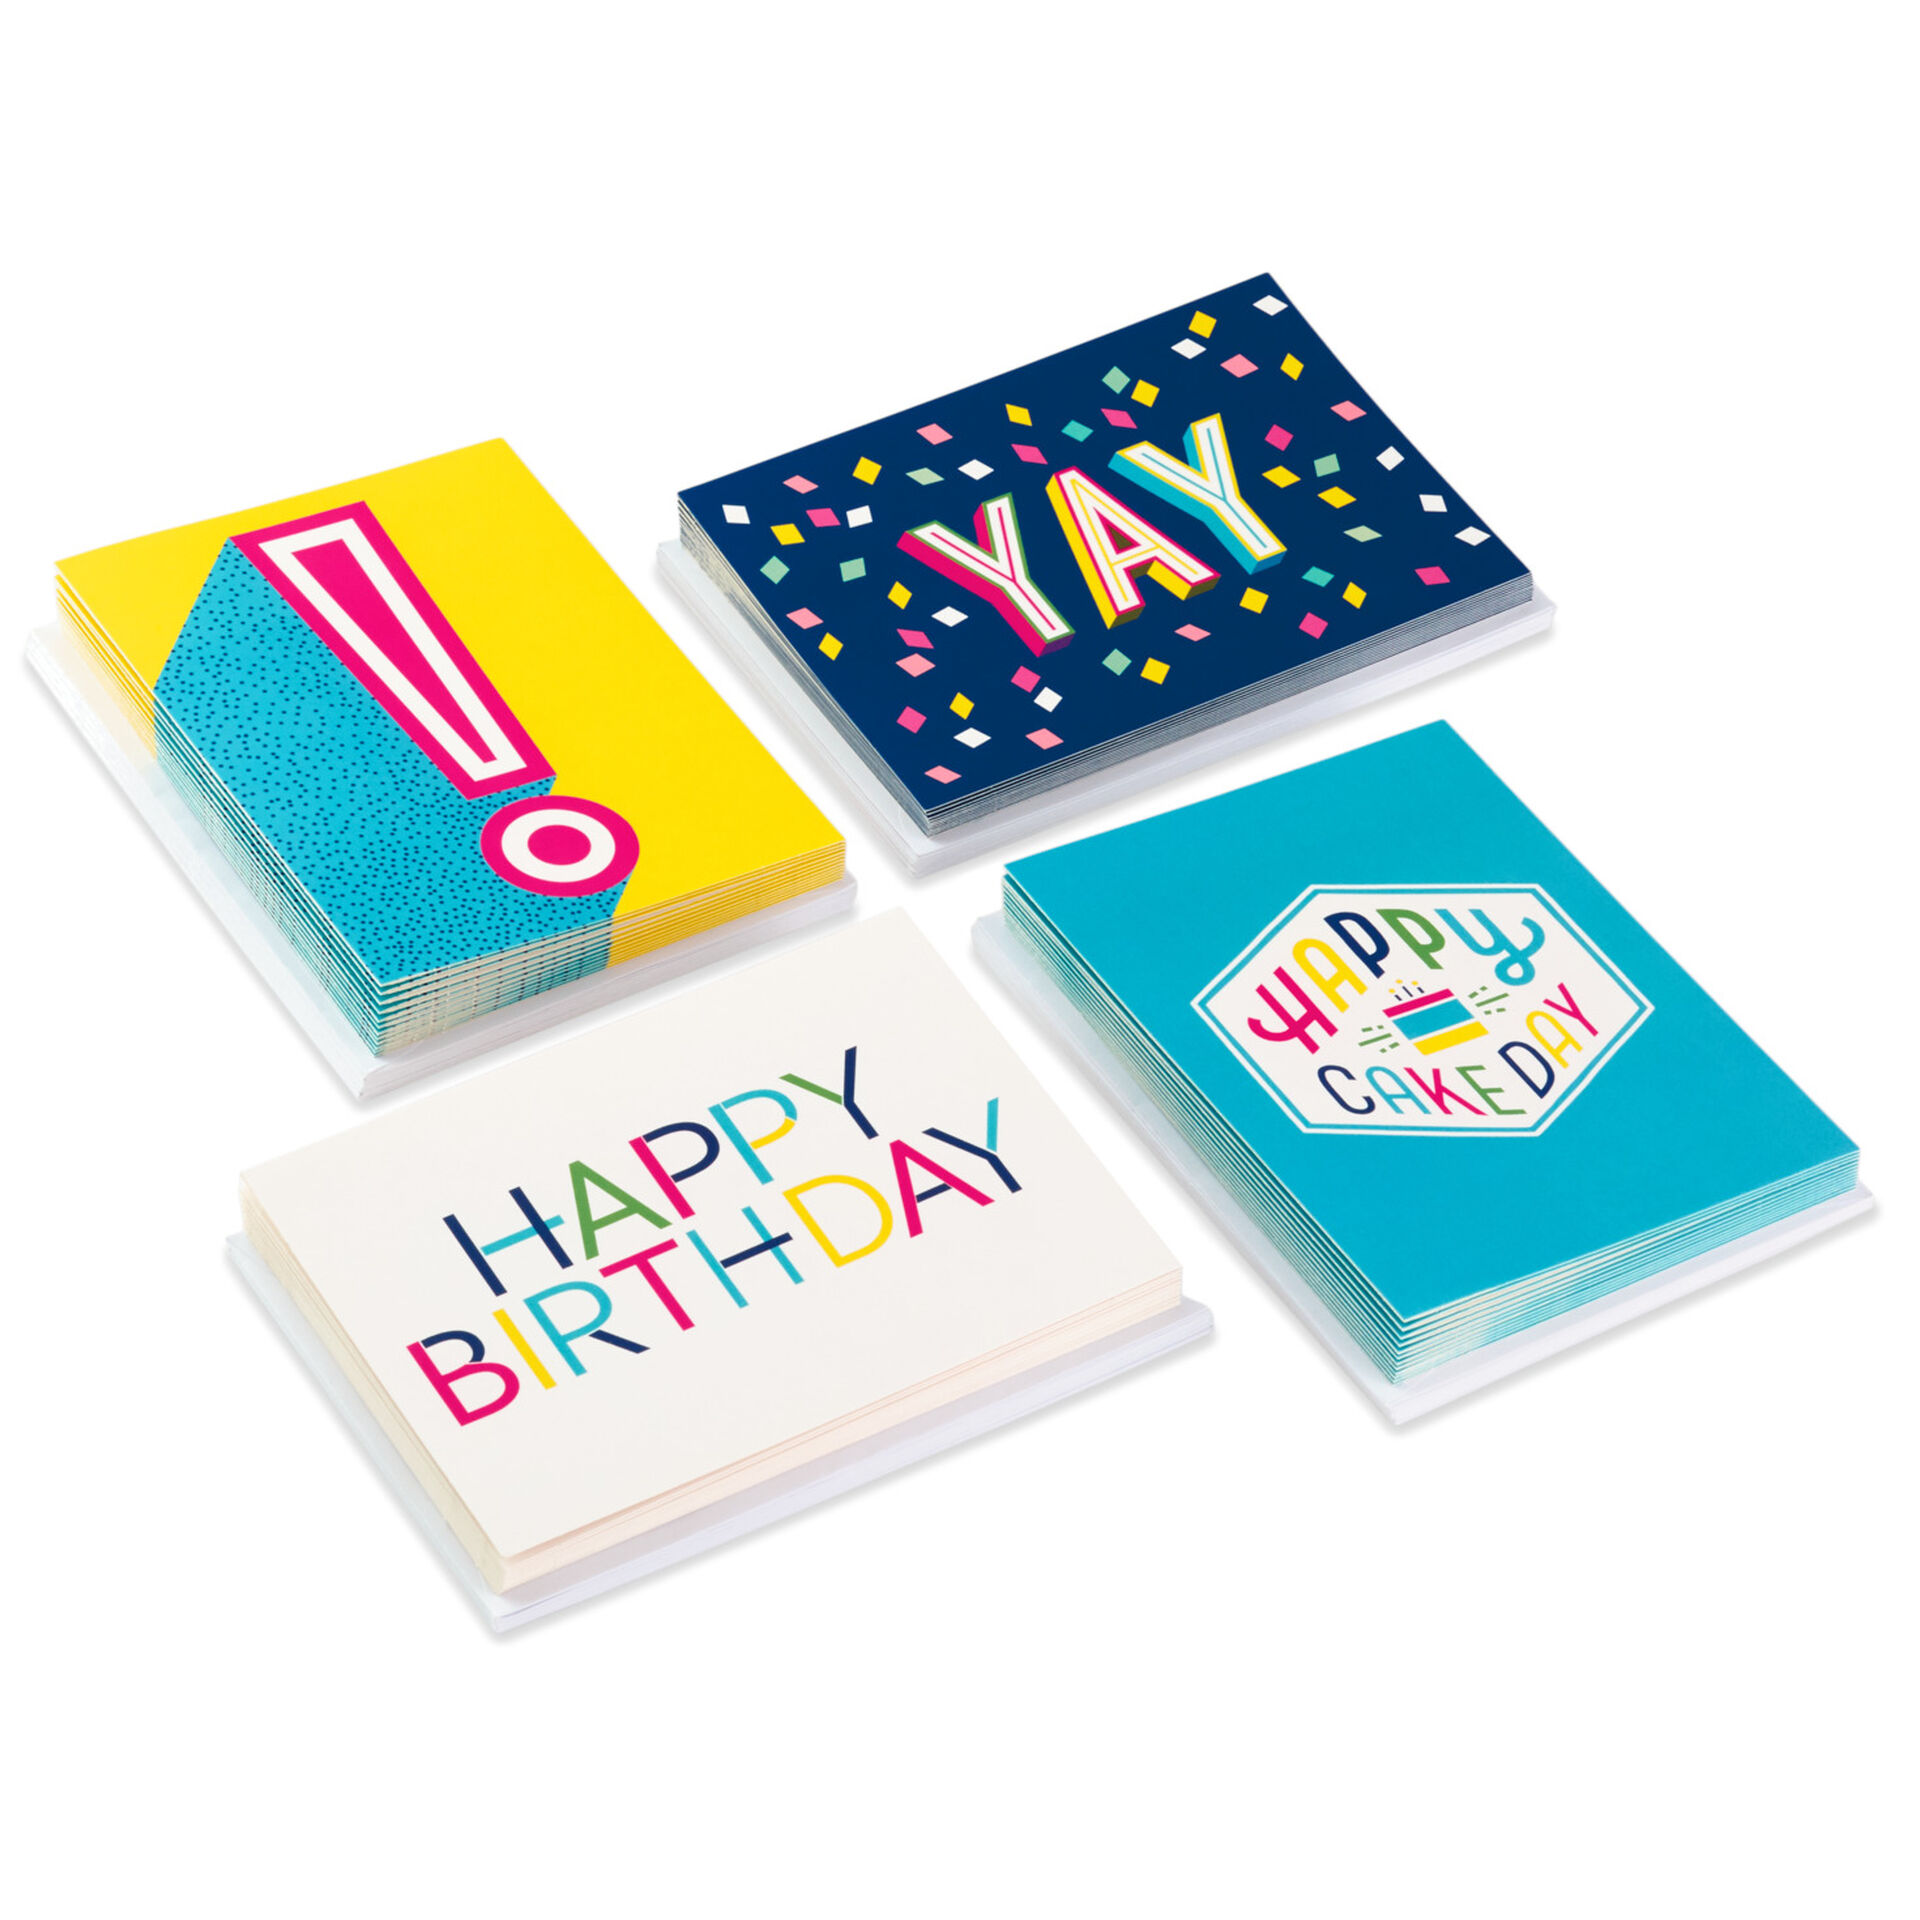 Bold-and-Bright-Birthday-Cards-Assortment-Pack_5STZ5123_01